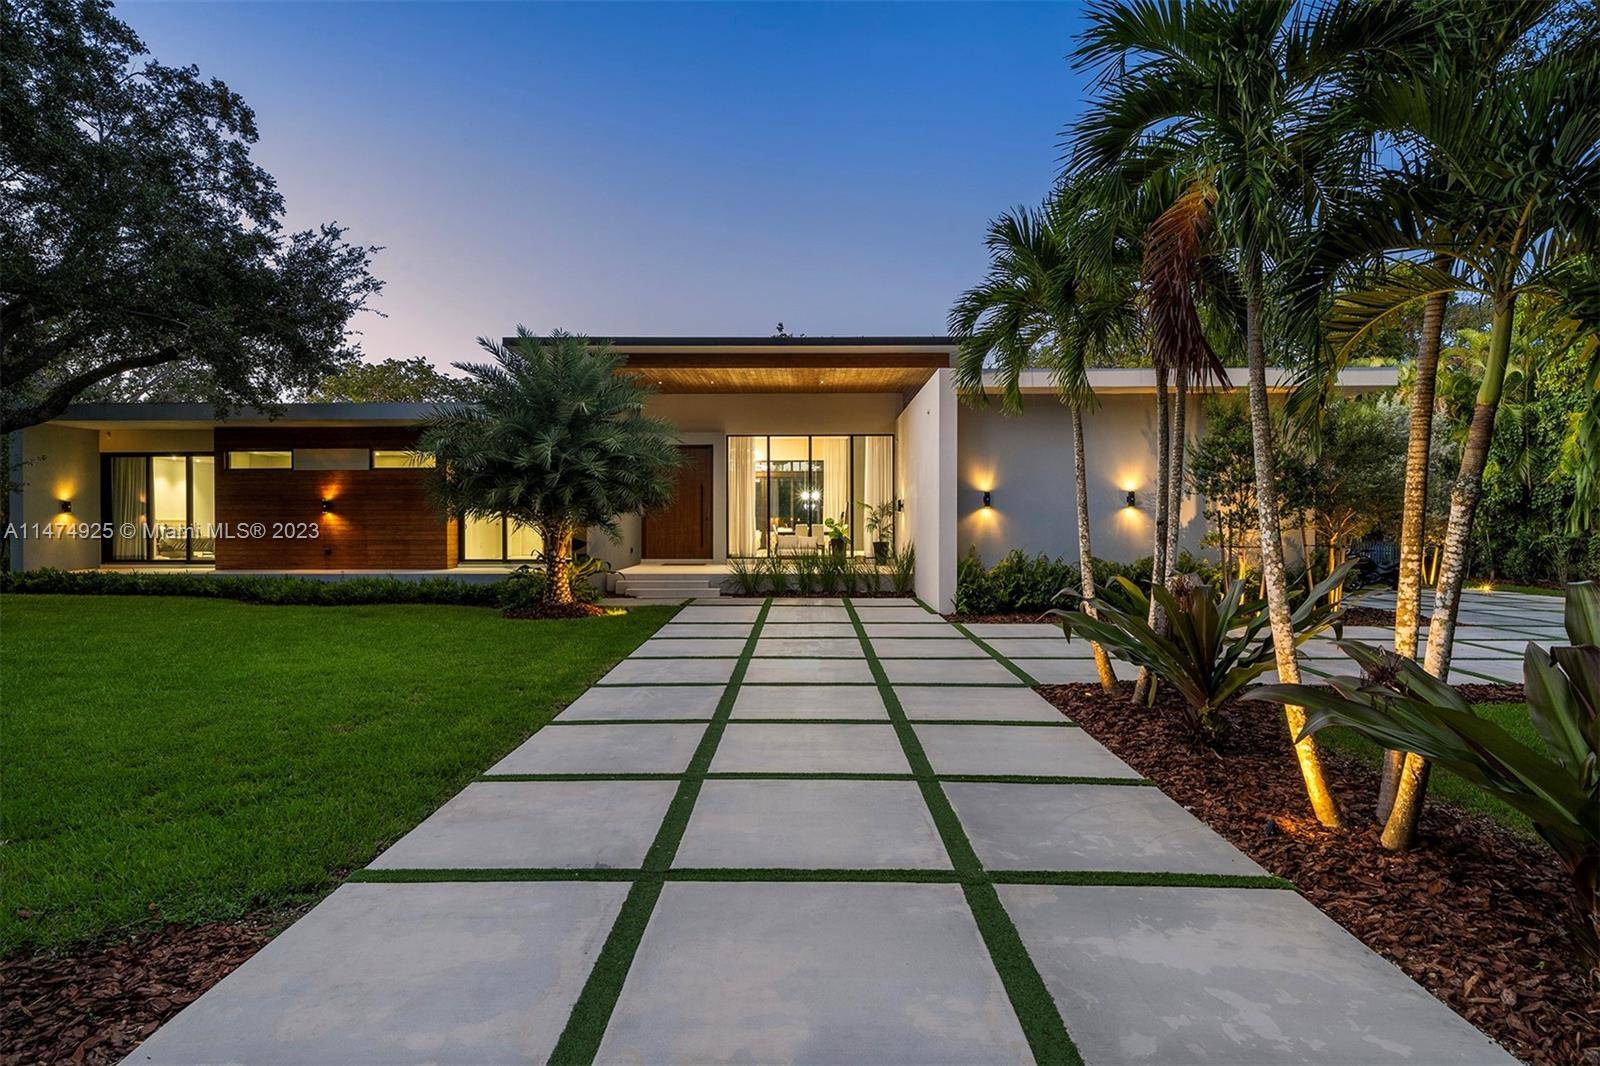 Nestled in the exclusive Pinecrest enclave, this masterpiece boasts 6 beds 6.